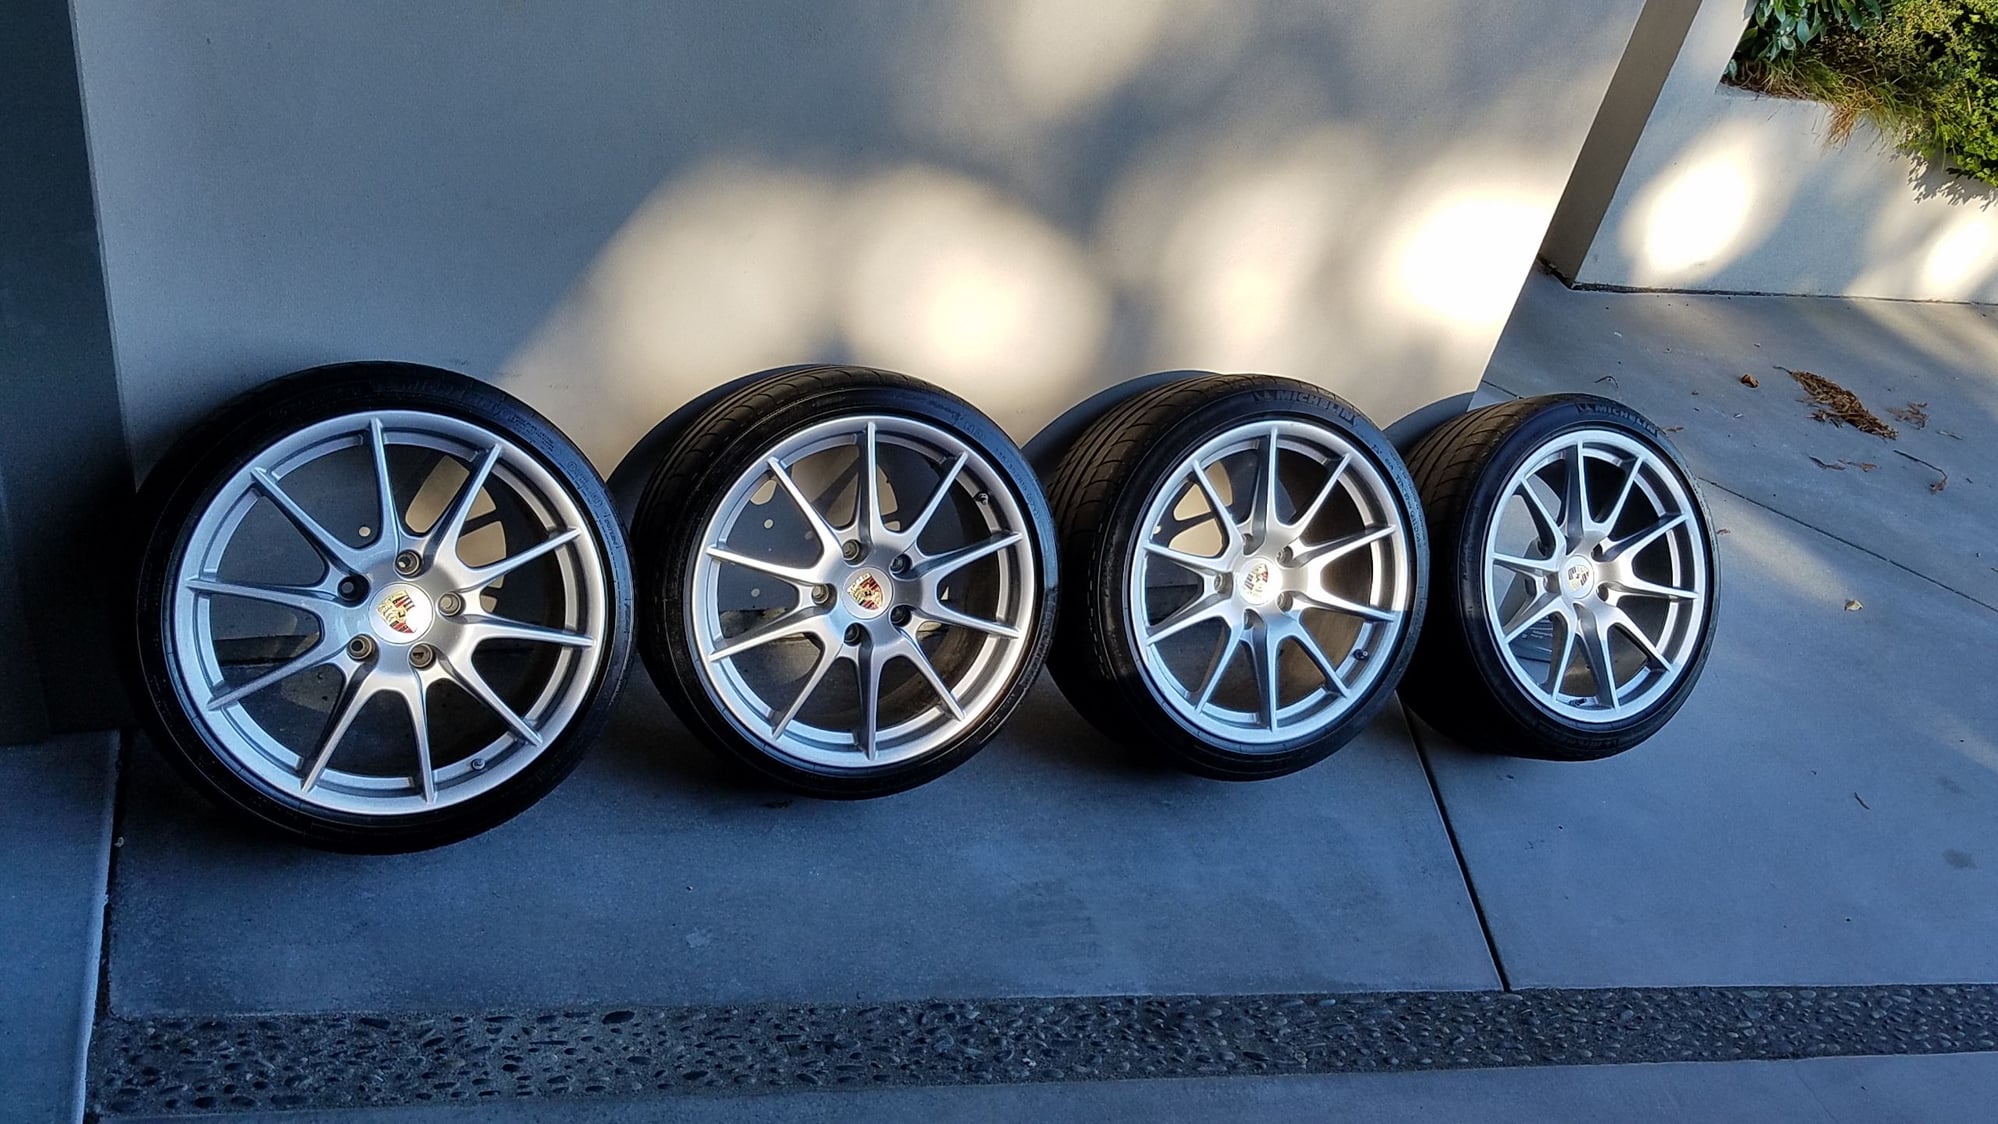 Wheels and Tires/Axles - FS NorCal - 987 Cayman R/986 Boxster Spyder OEM 19 silver wheels set w Michelin PS2 - Used - 1999 to 2012 Porsche Boxster - 2006 to 2012 Porsche Cayman - Corte Madera, CA 94925, United States